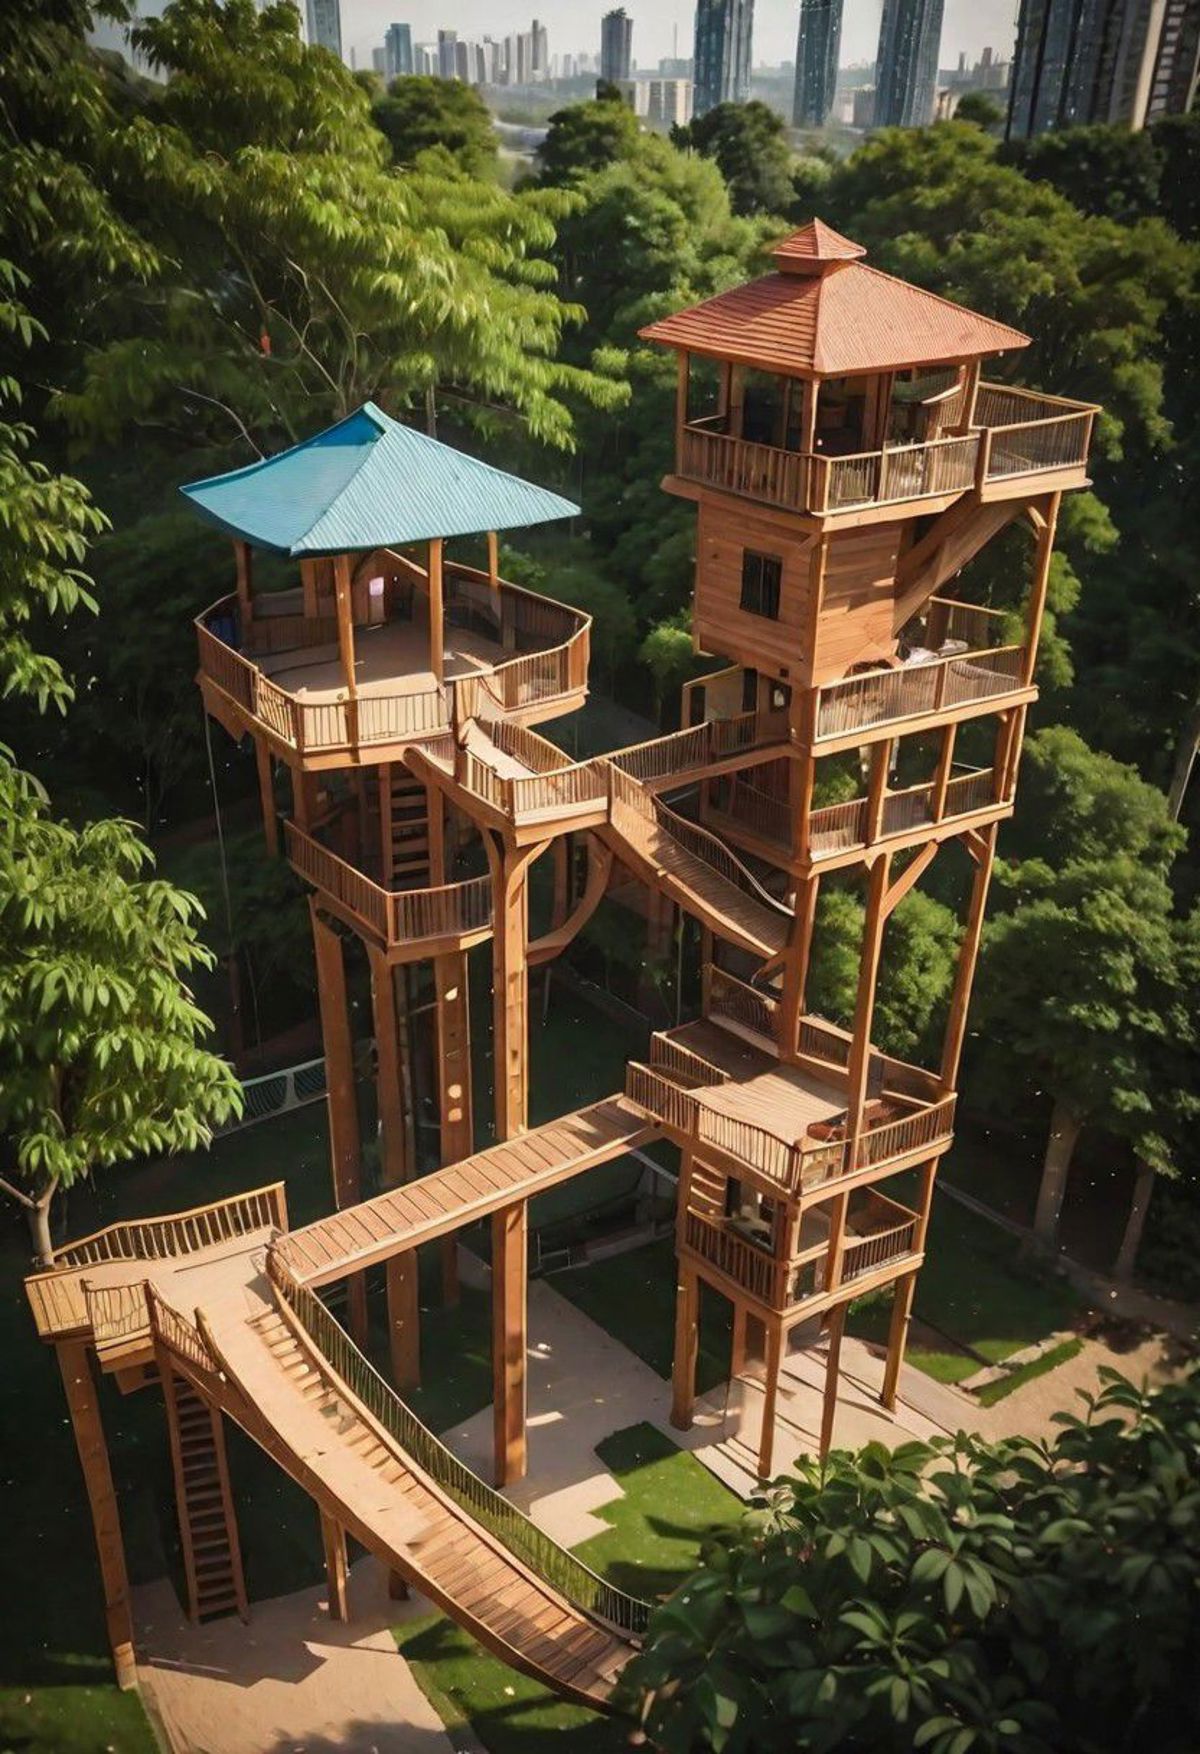 treehouse_XL image by tlscope222